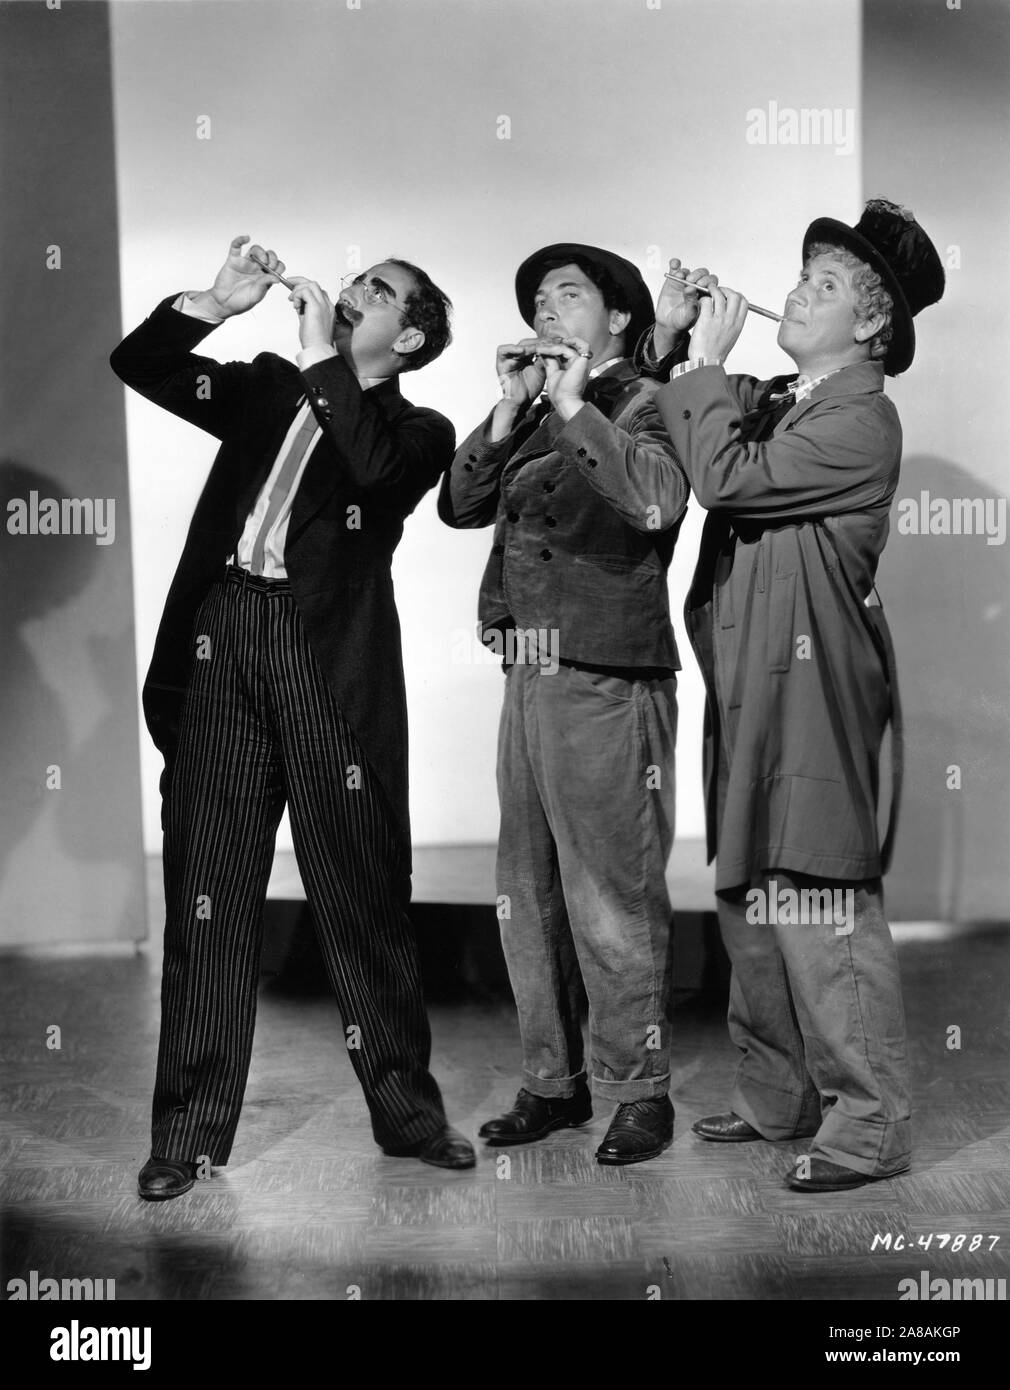 GROUCHO MARX CHICO MARX HARPO MARX THE MARX BROTHERS Portrait by Clarence Sinclair Bull for A NIGHT AT THE OPERA 1935 director Sam Wood screenplay George S. Kaufman and Morrie Ryskind producer Irving Thalberg Metro Goldwyn Mayer Stock Photo